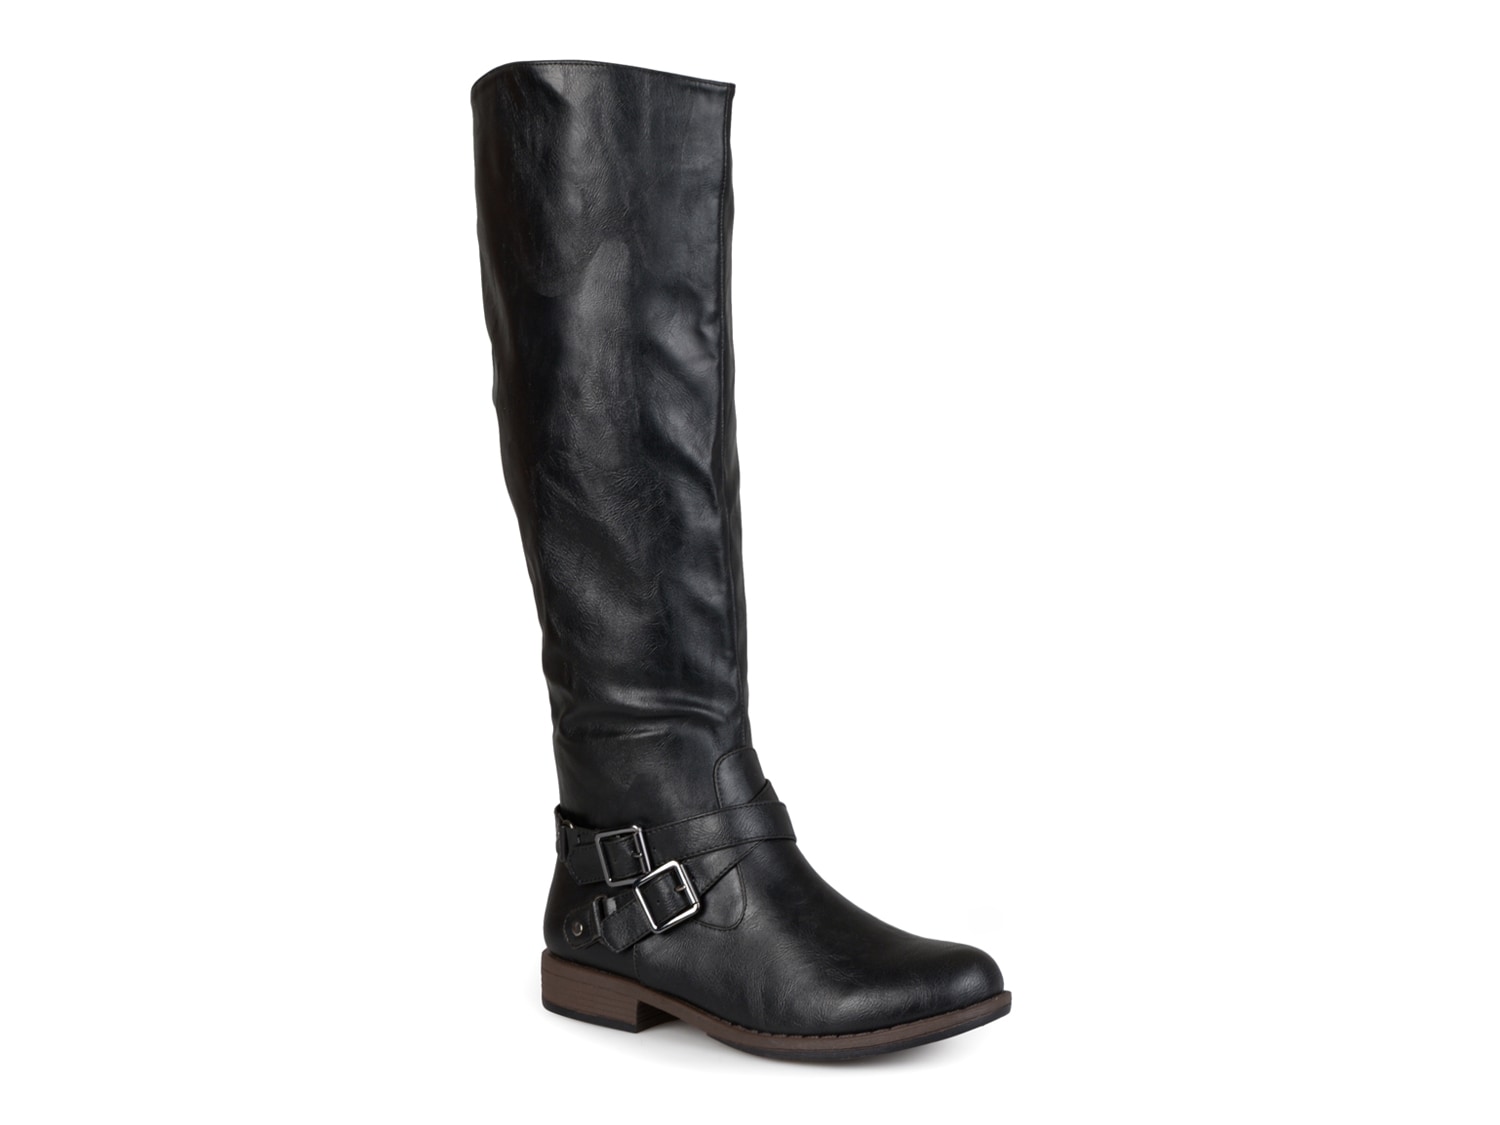 Journee Collection April Riding Boot - Free Shipping | DSW